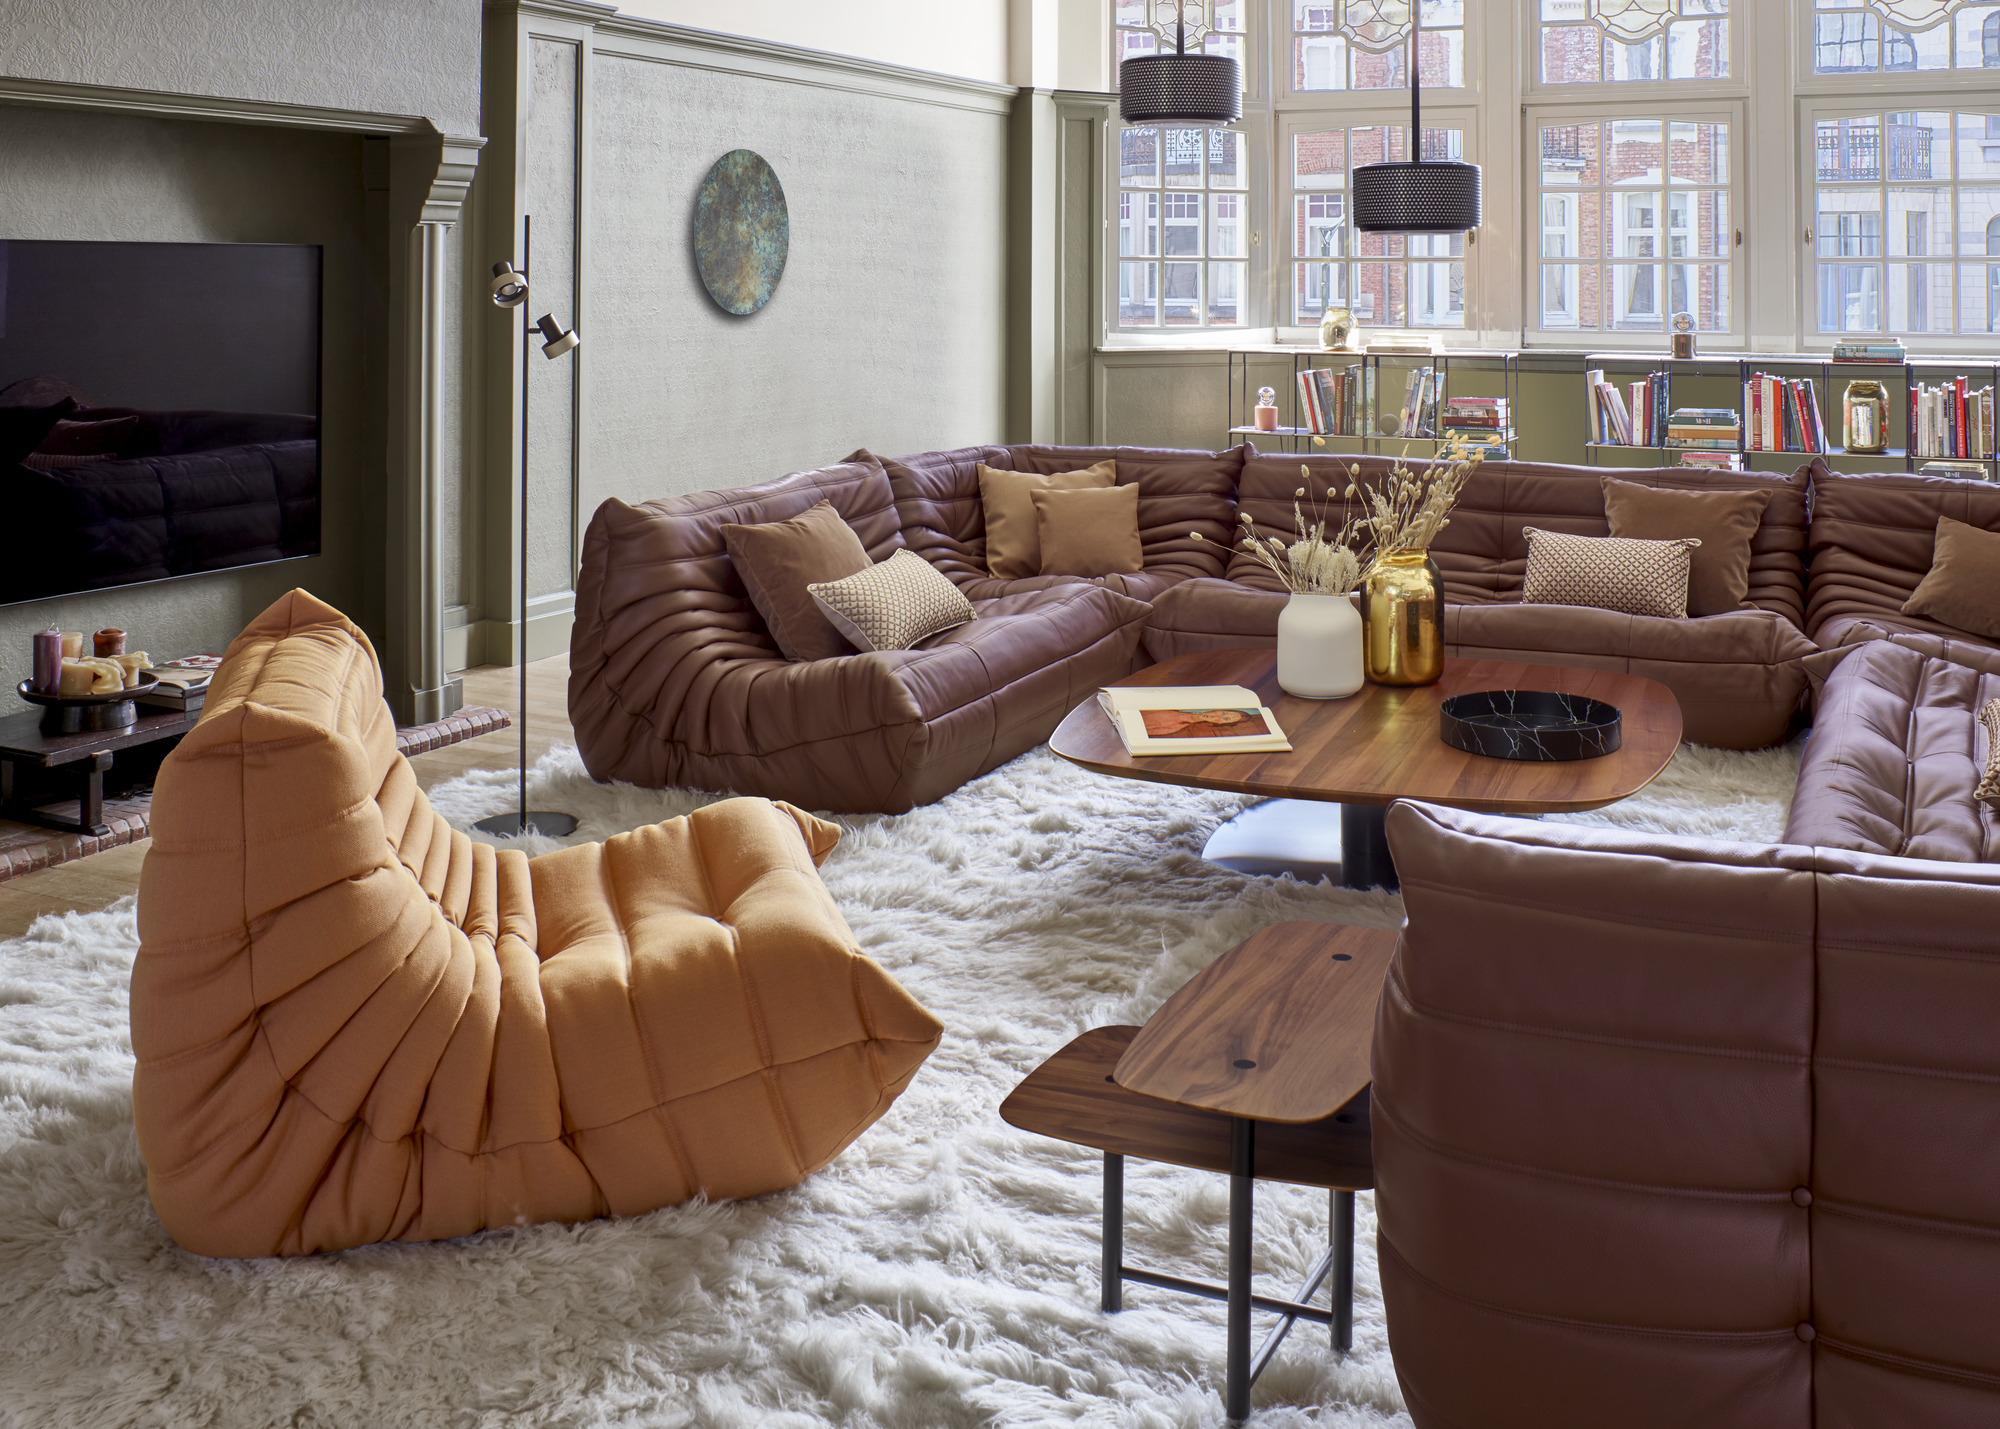 Ligne Roset Togo Fireside Chair and Ottoman by Michel Ducaroy